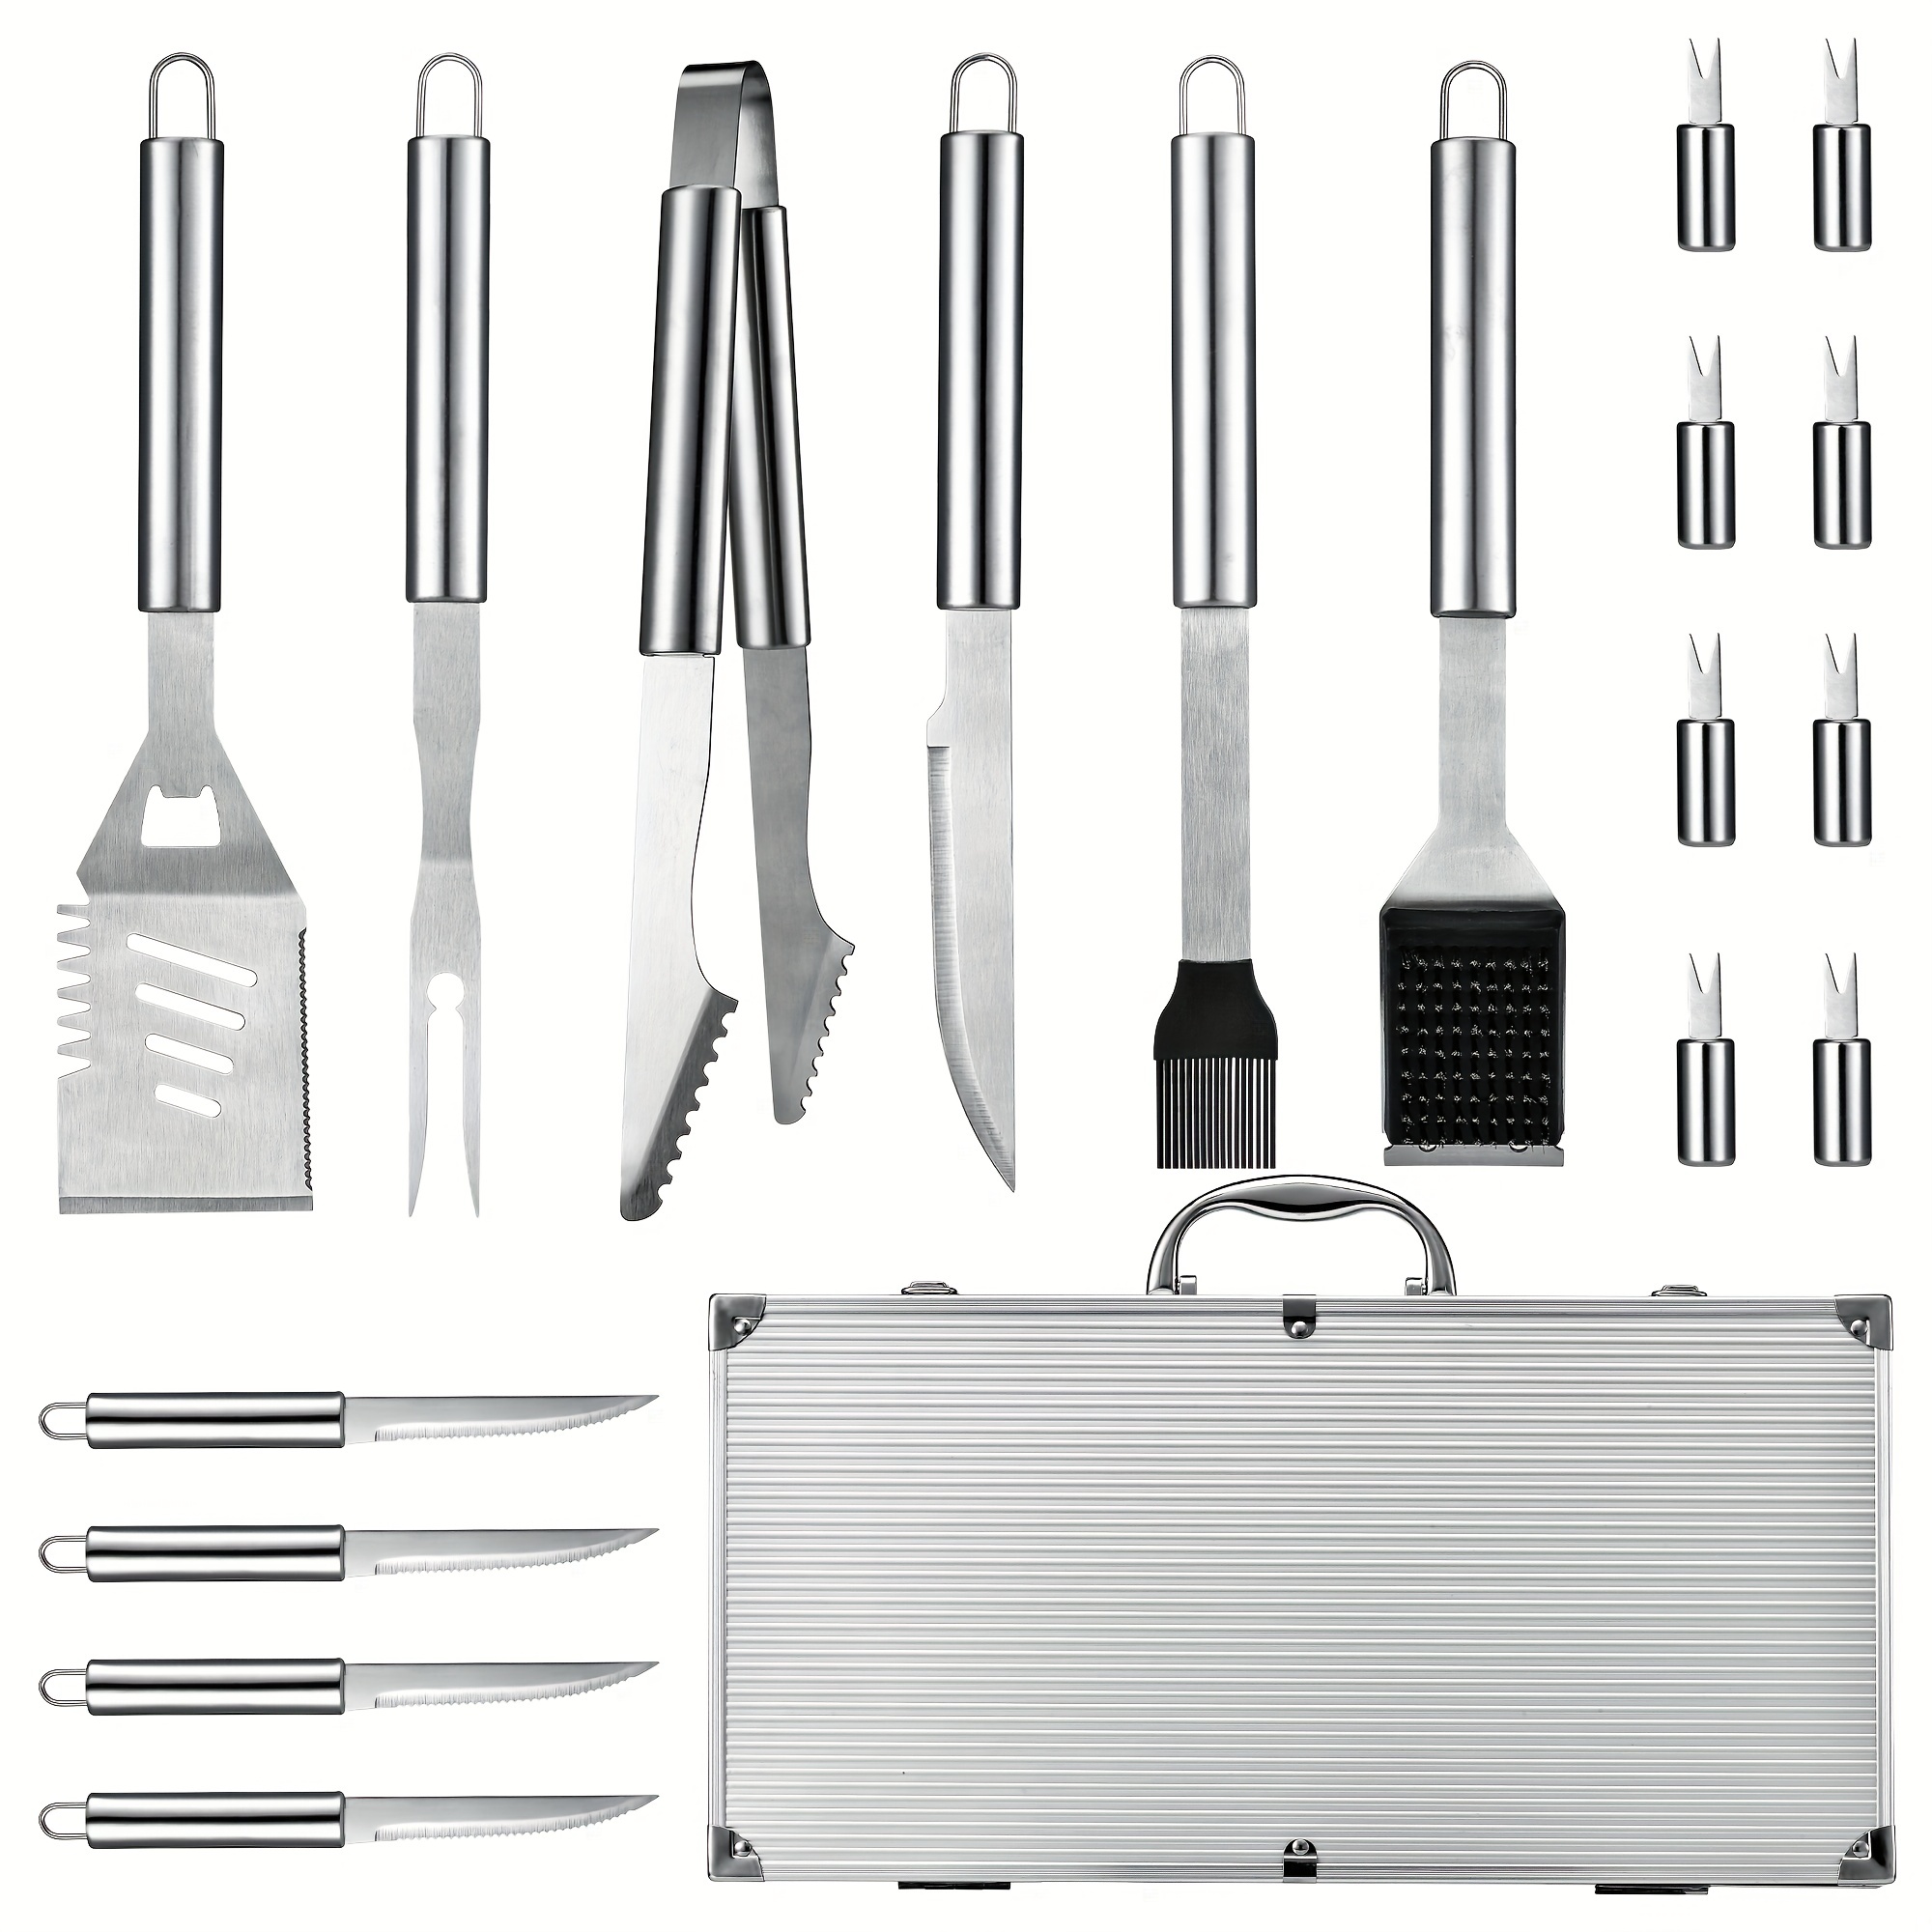 BBQ Accessories Kit - 20pcs Stainless BBQ Grill Tools Set for Smoker  Camping Barbecue Grilling Tools BBQ Utensil Set Outdoor Cooking Tool Set  with